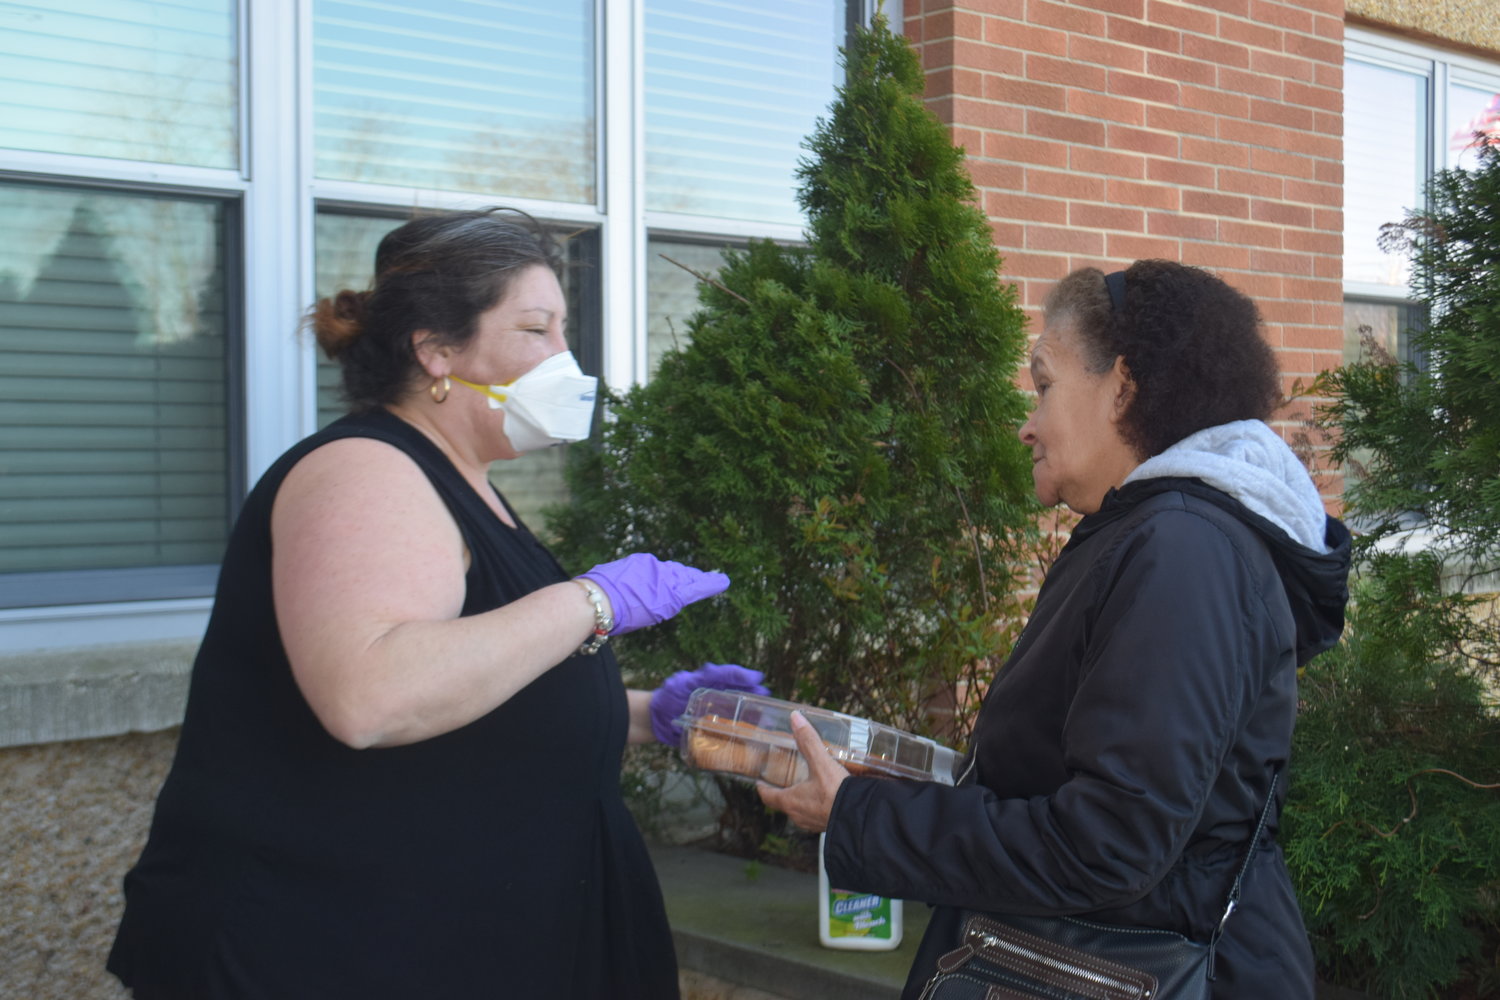 Inwood resident Sasha Young, left, distributed food to other Five Towns residents at the Community Center in Lawrence on March 27.